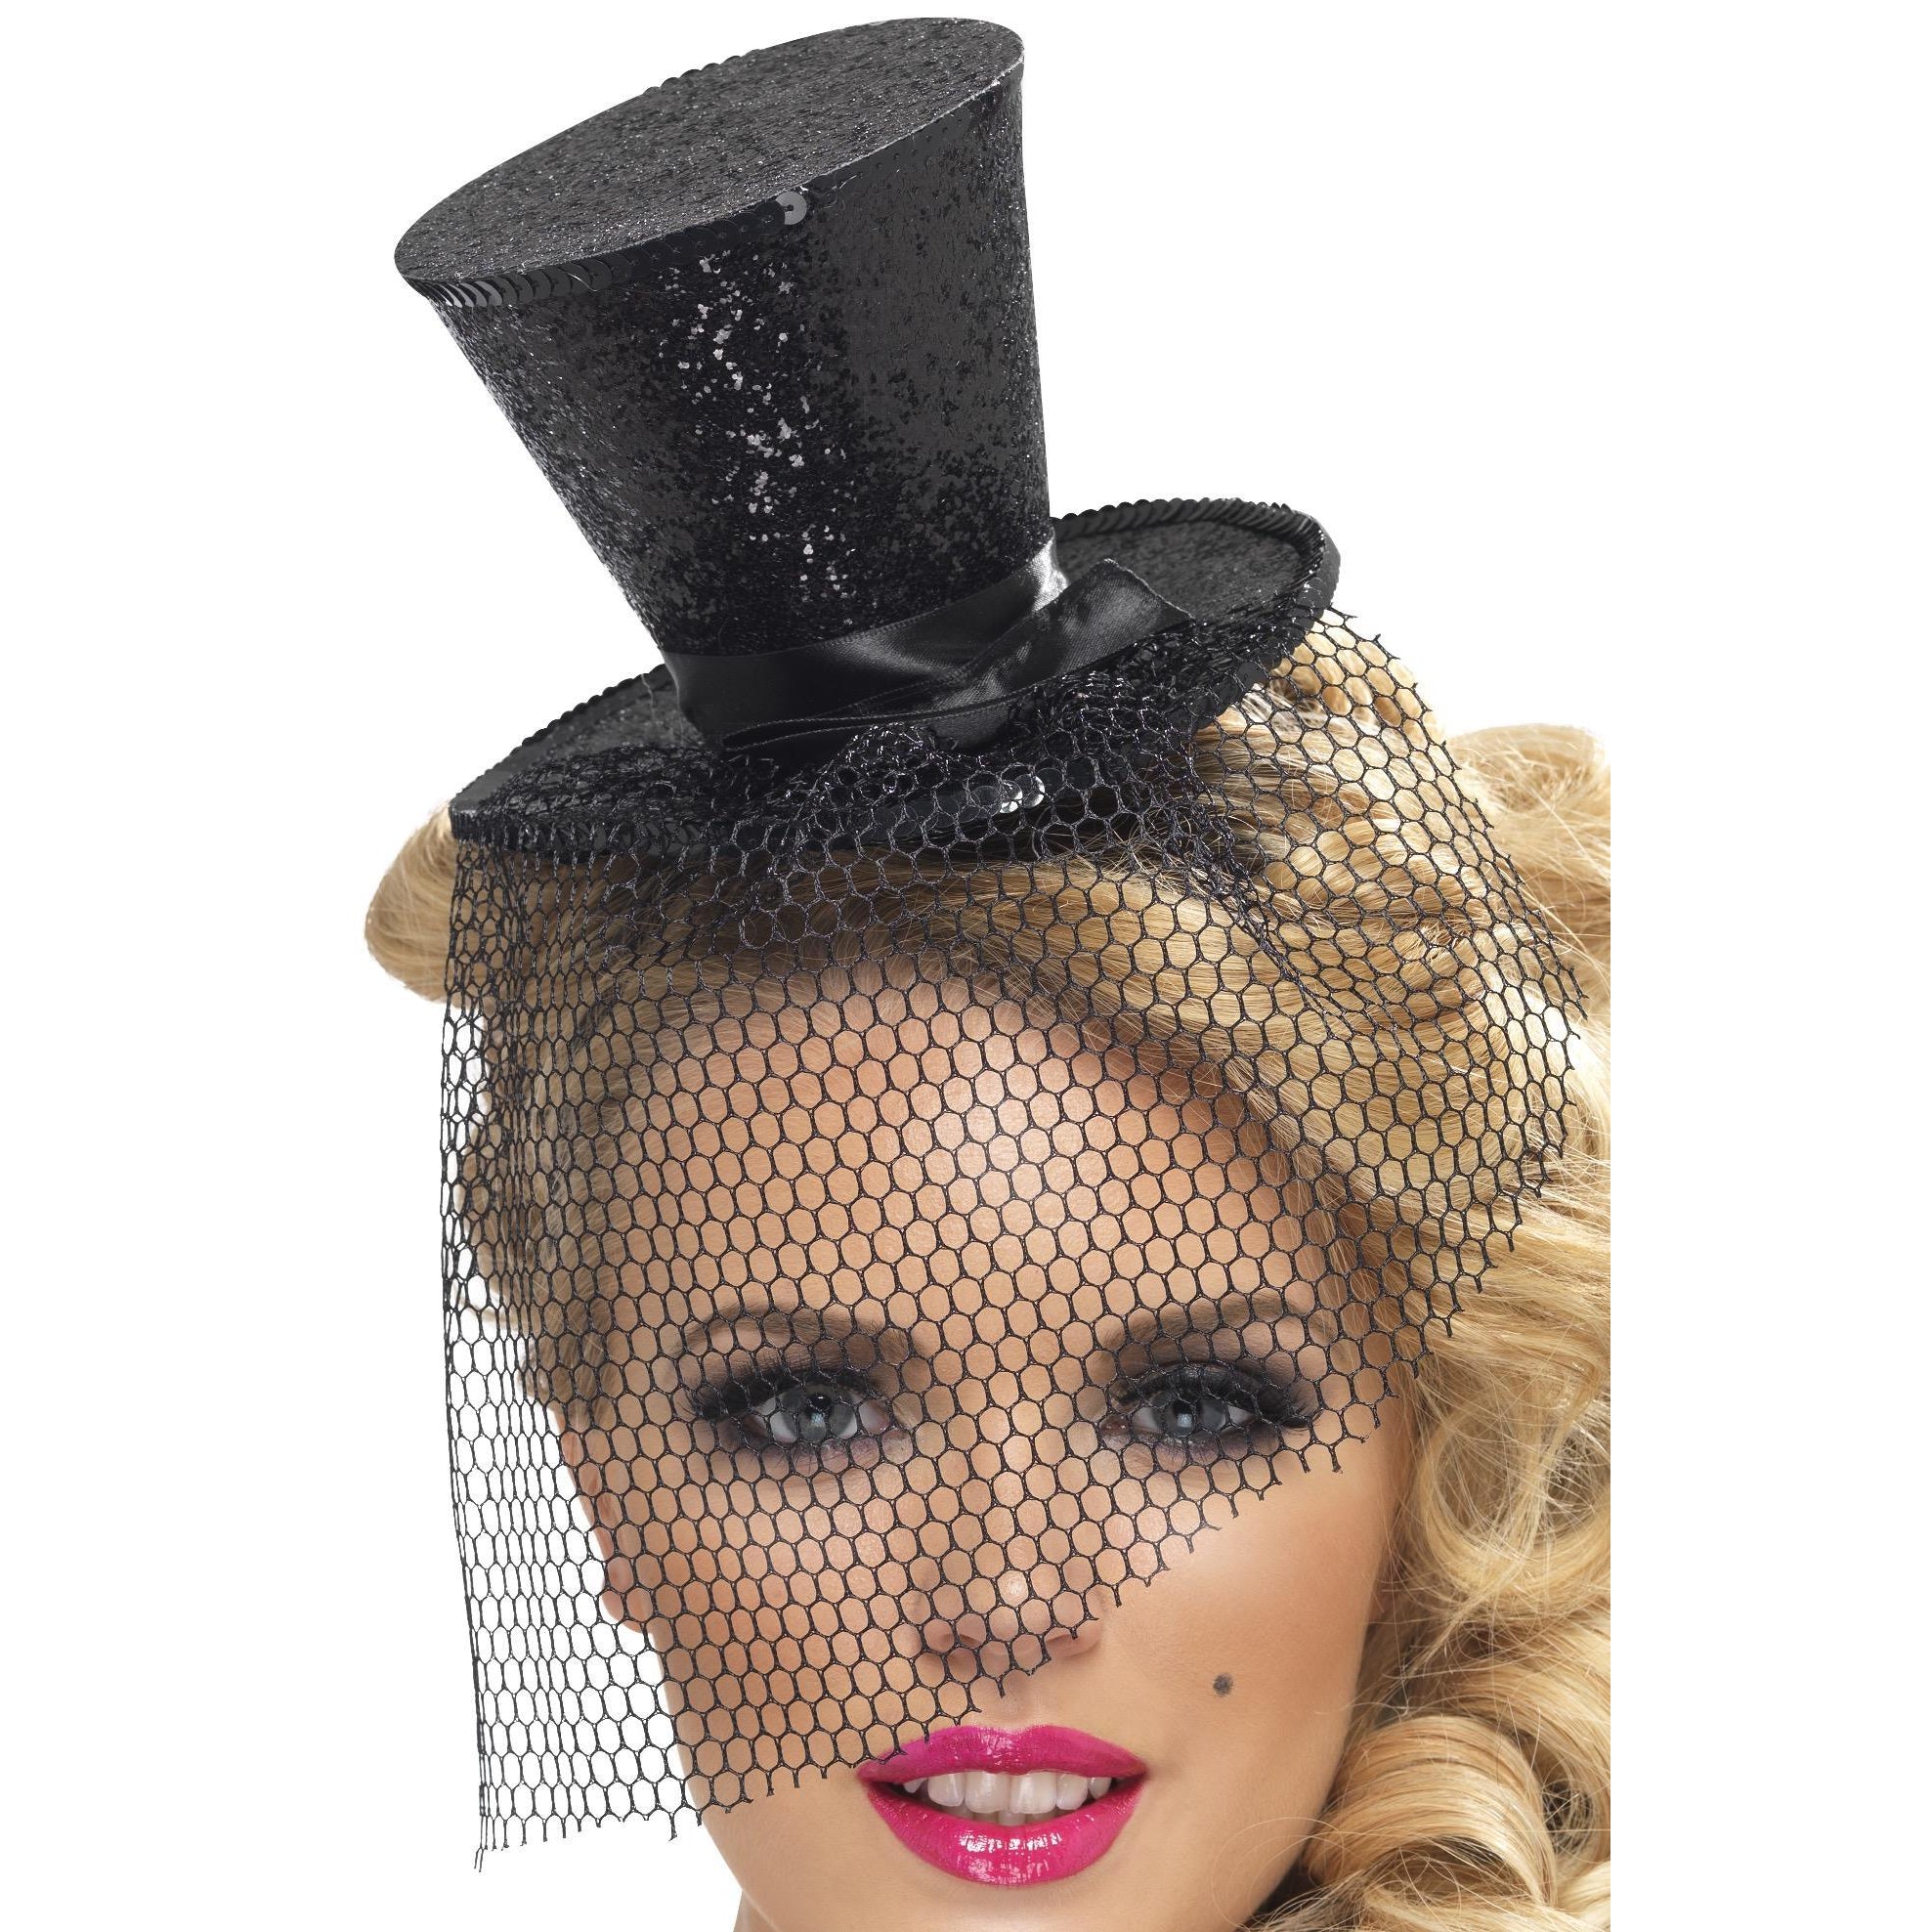 Black mini top hat with glitter and veil close up